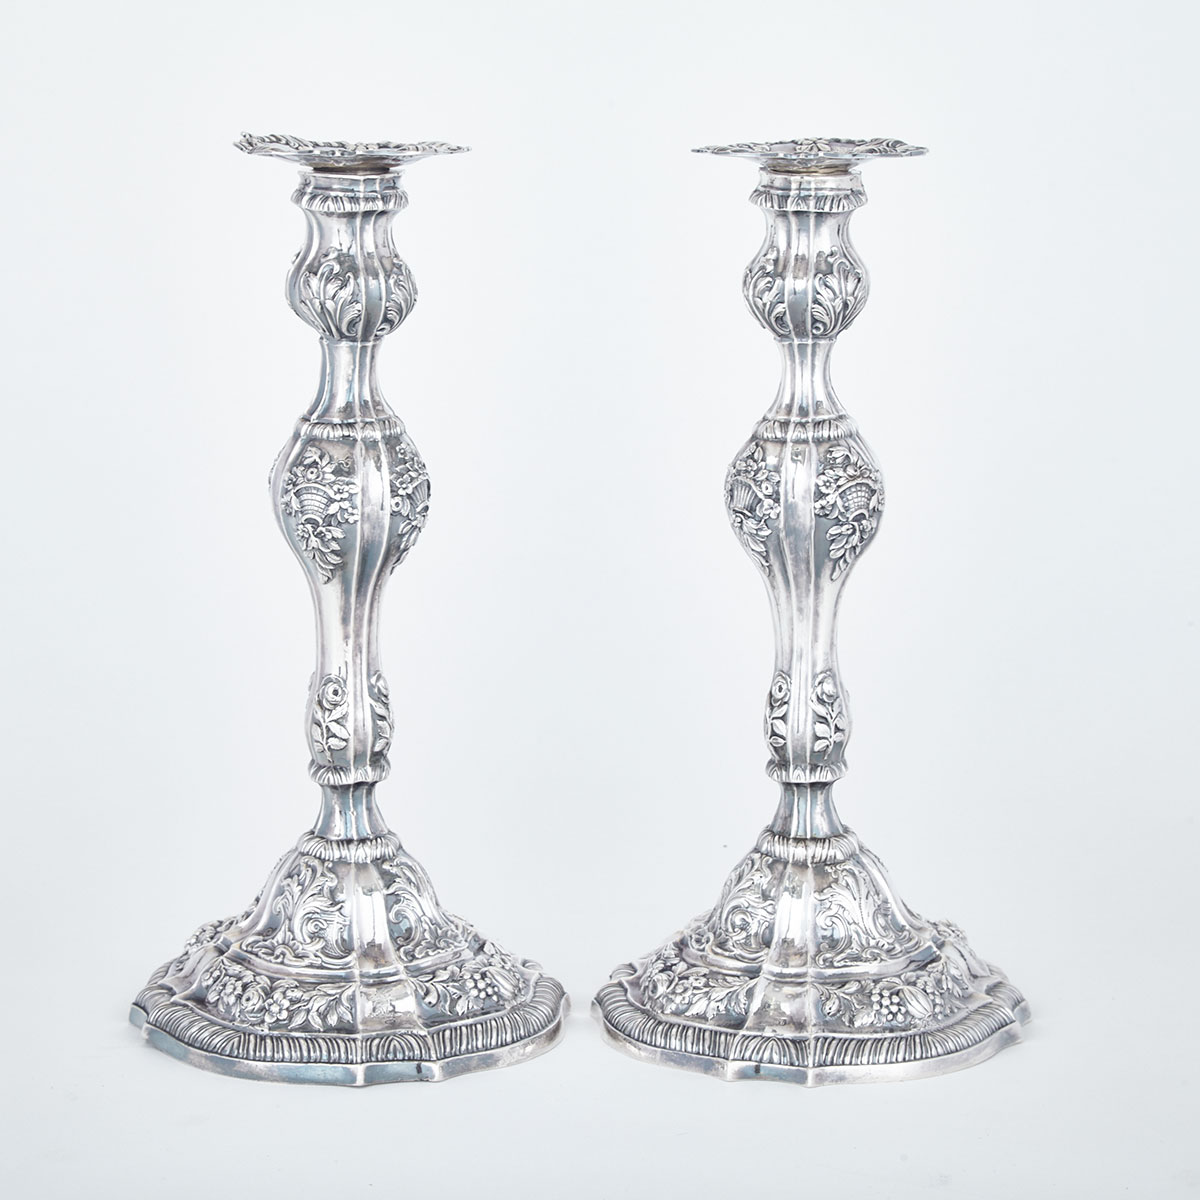 Pair of George III Silver Table Candlesticks, William Tuite, London, 1765